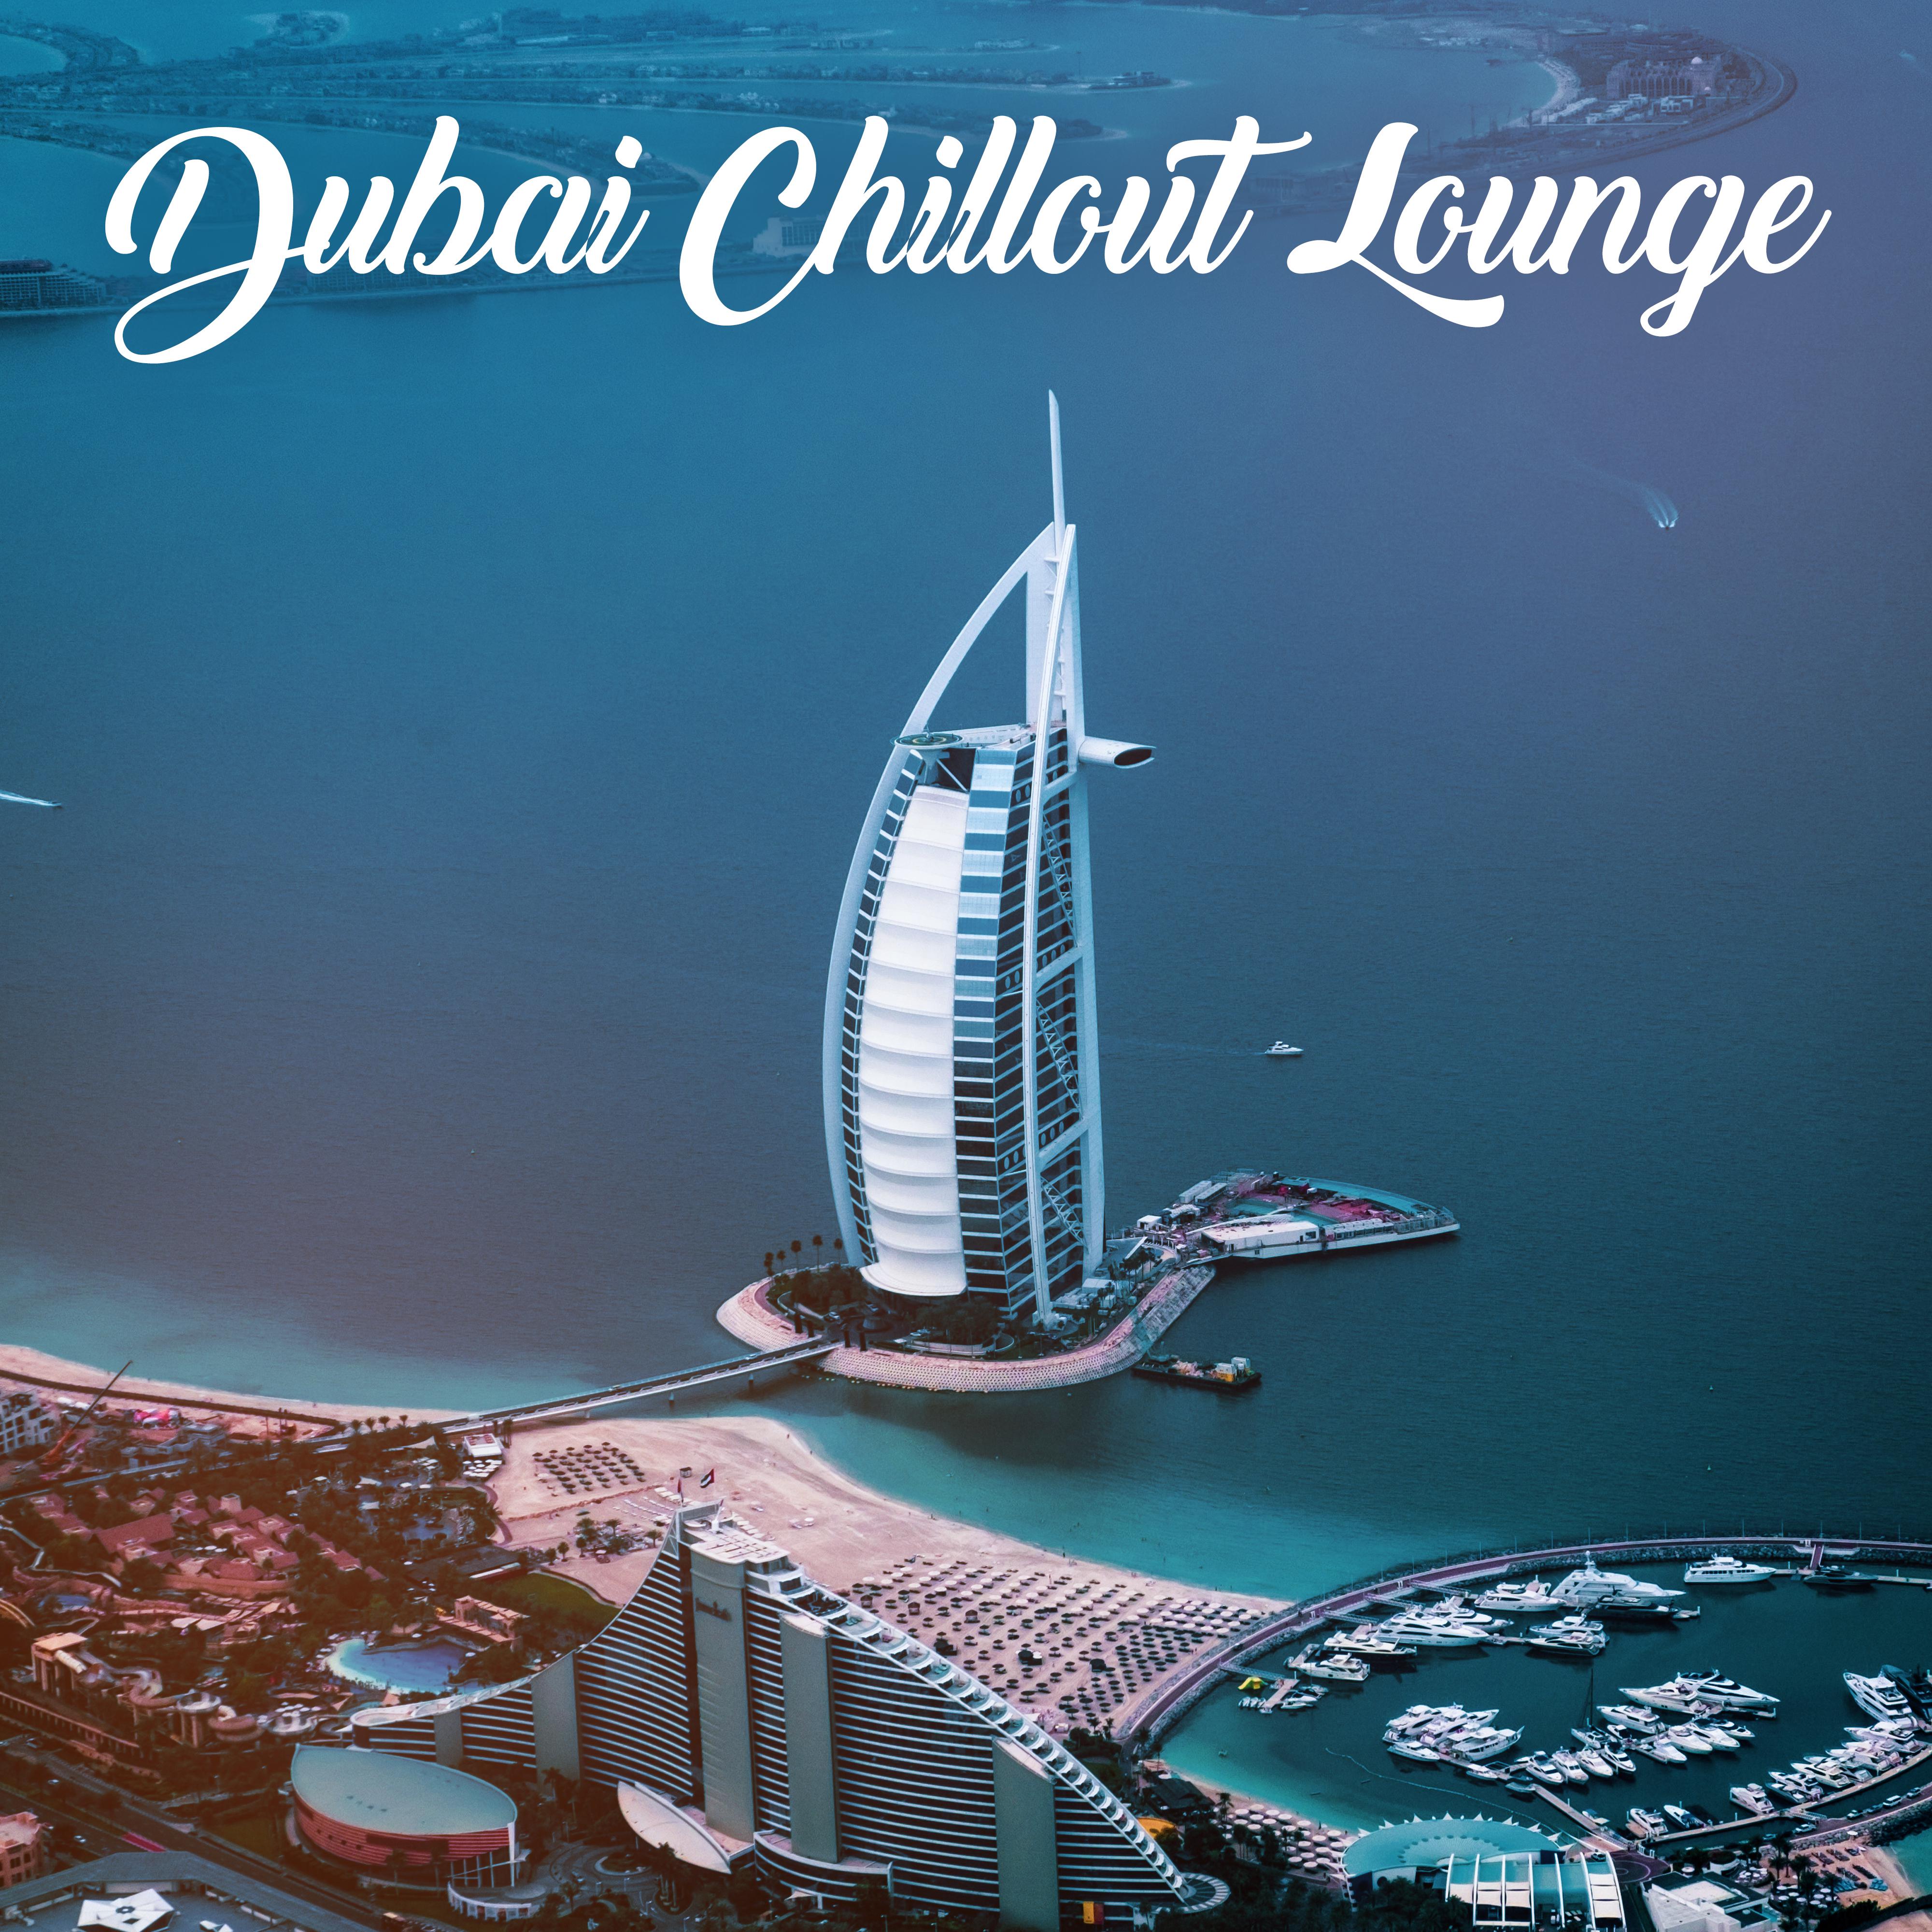 Dubai Chillout Lounge  Summer Hits 2019, Holiday Vibes, Vacation Rhythms, Party Hits 2019, Summertime, Deep Relaxation, Relaxing Music